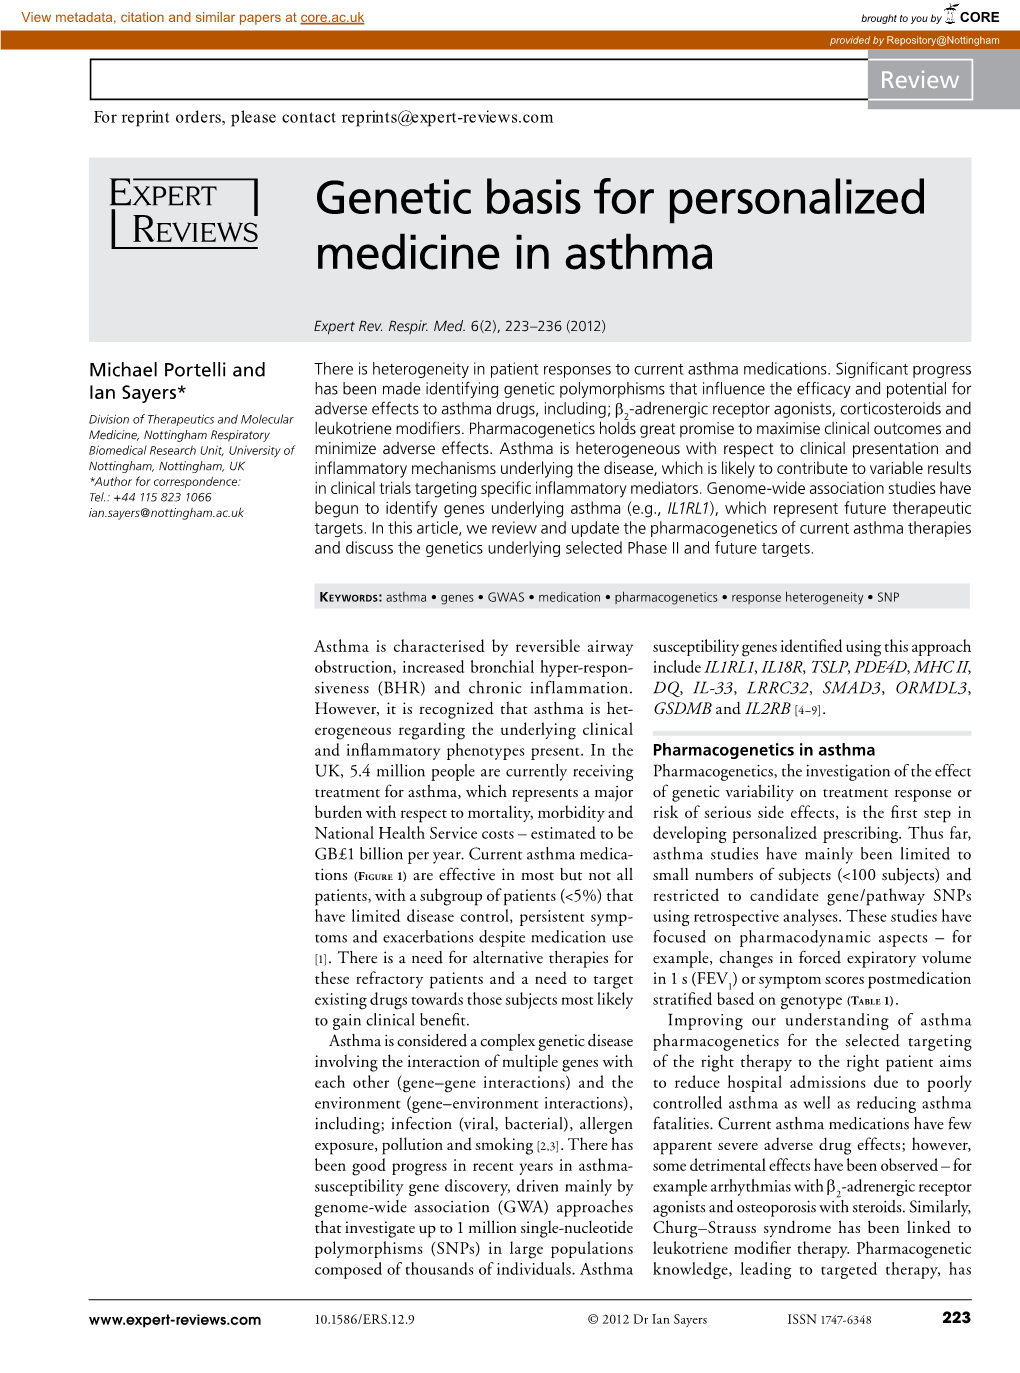 Genetic Basis for Personalized Medicine in Asthma